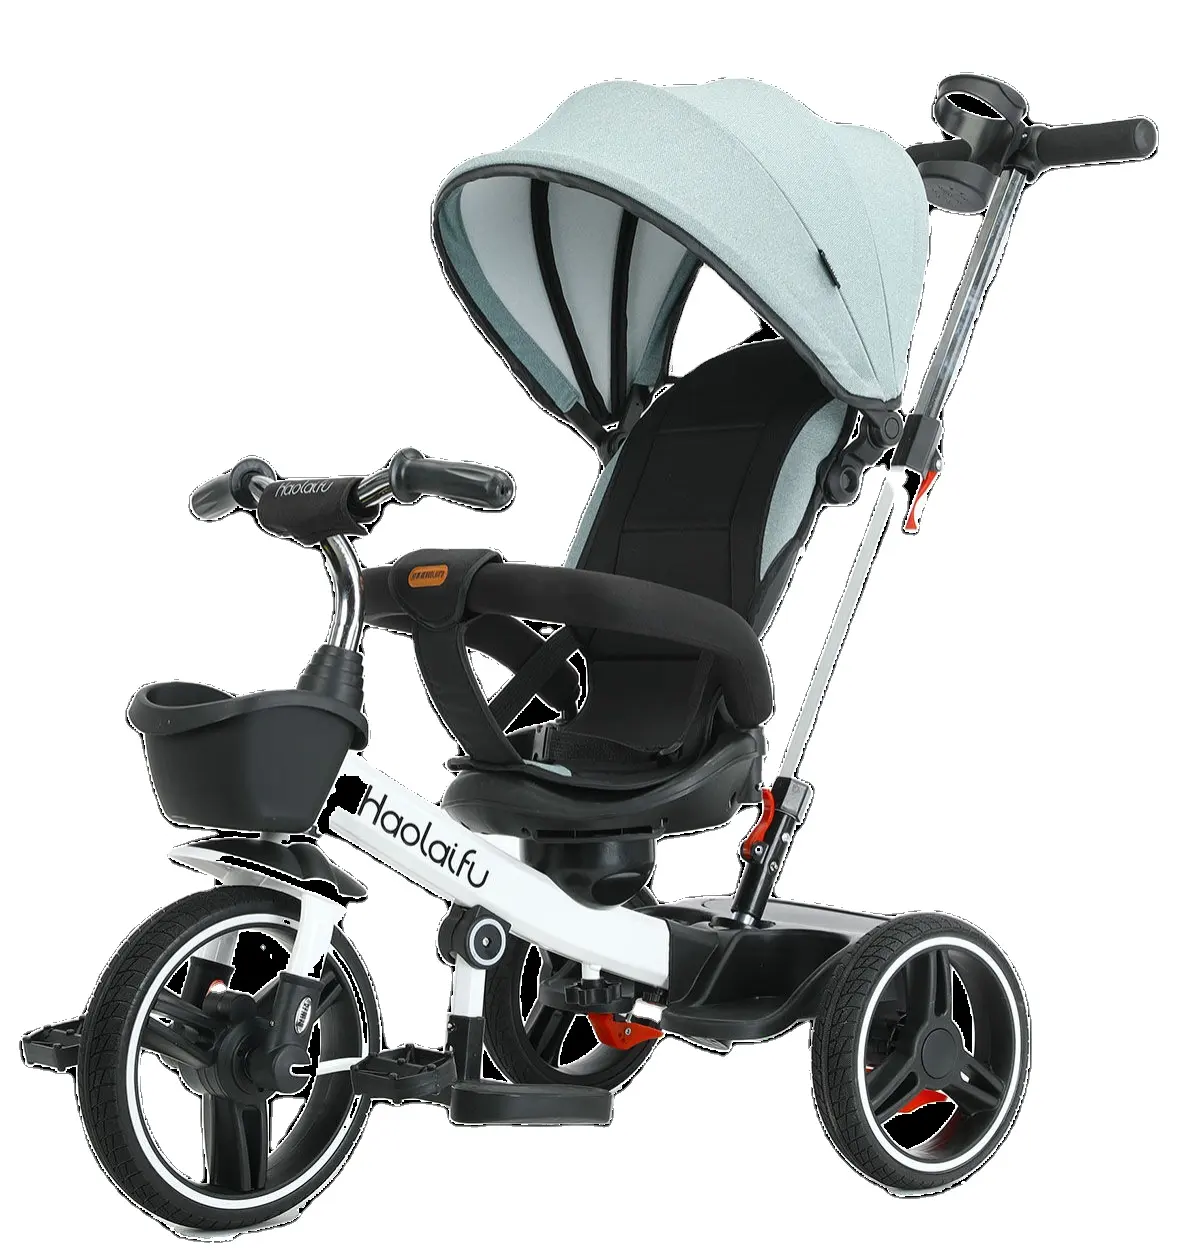 4 in 1 Kids Trike with Push HandleAll-Terrain PU Wheel for 18 Months - 5 Year Baby Tricycle